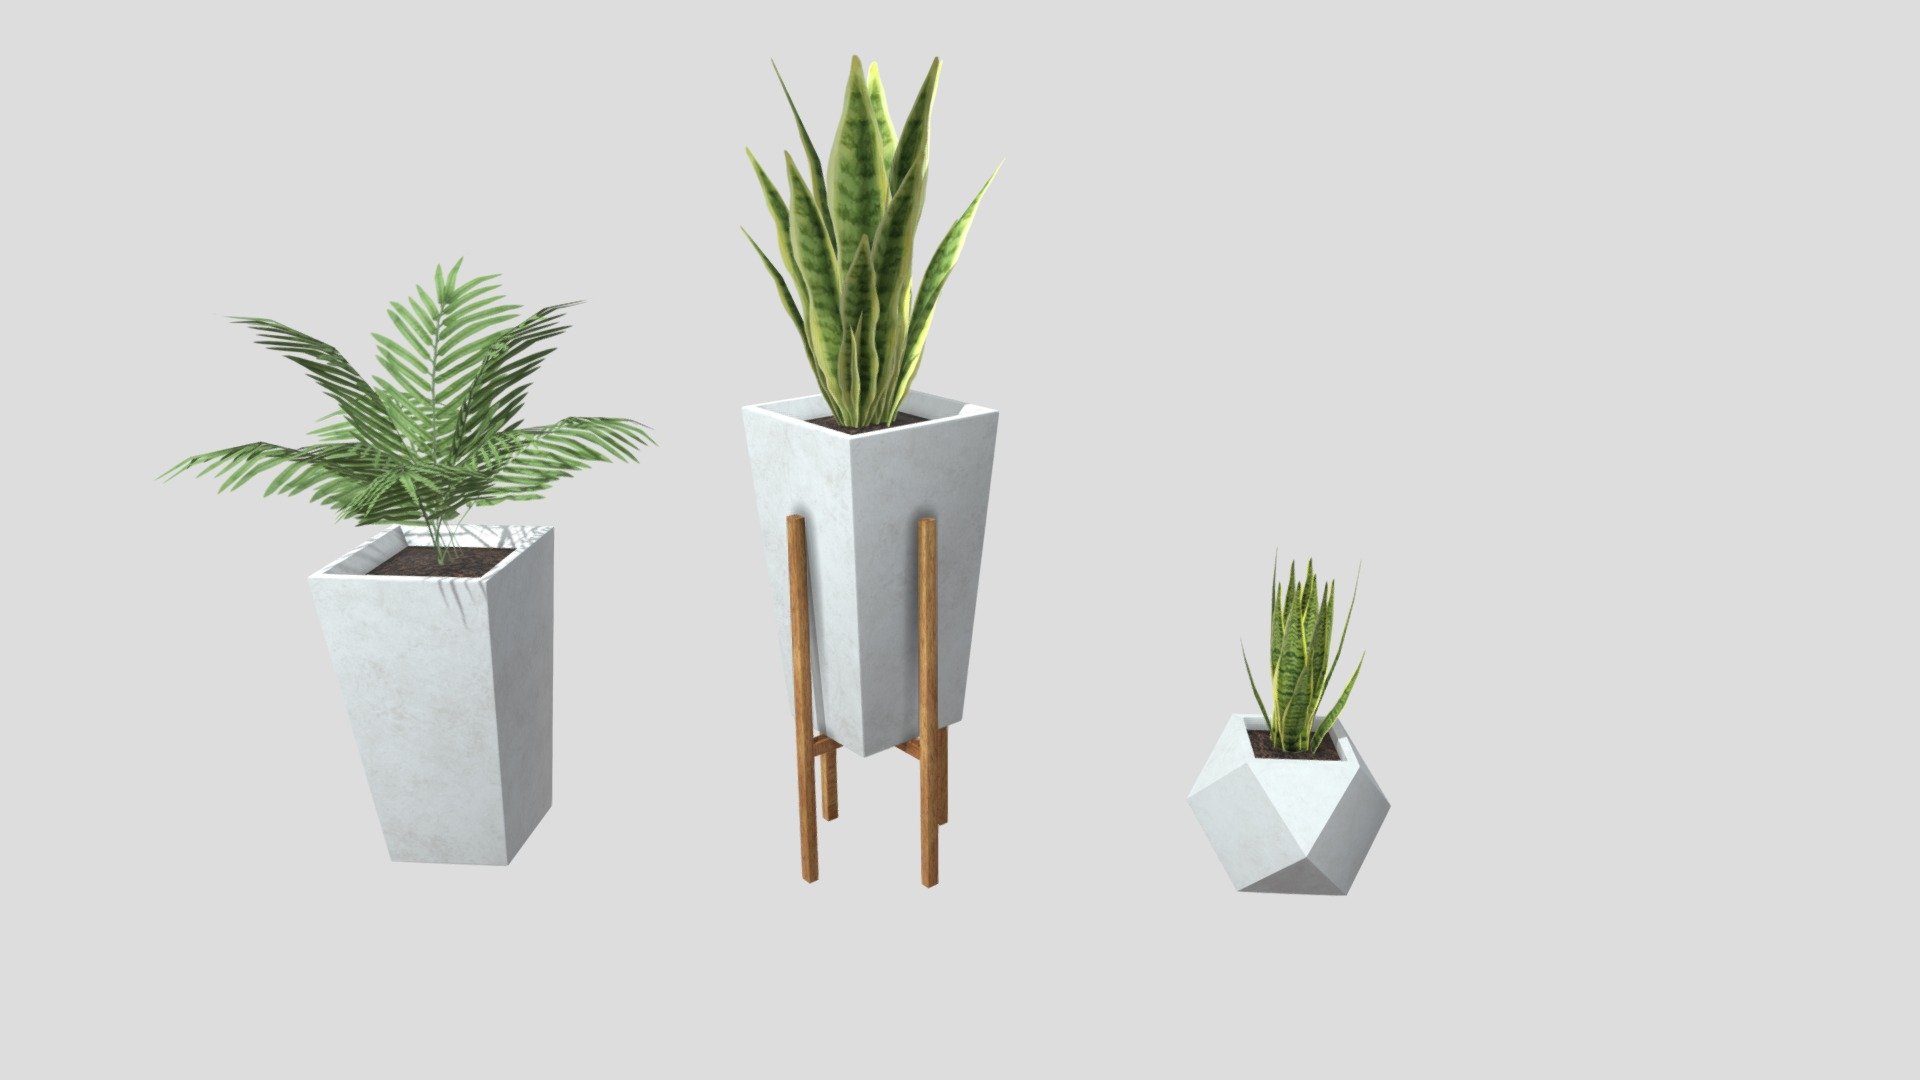 House plants for decoration and render.
Optimal topology for games.
With three modern pot options 3d model